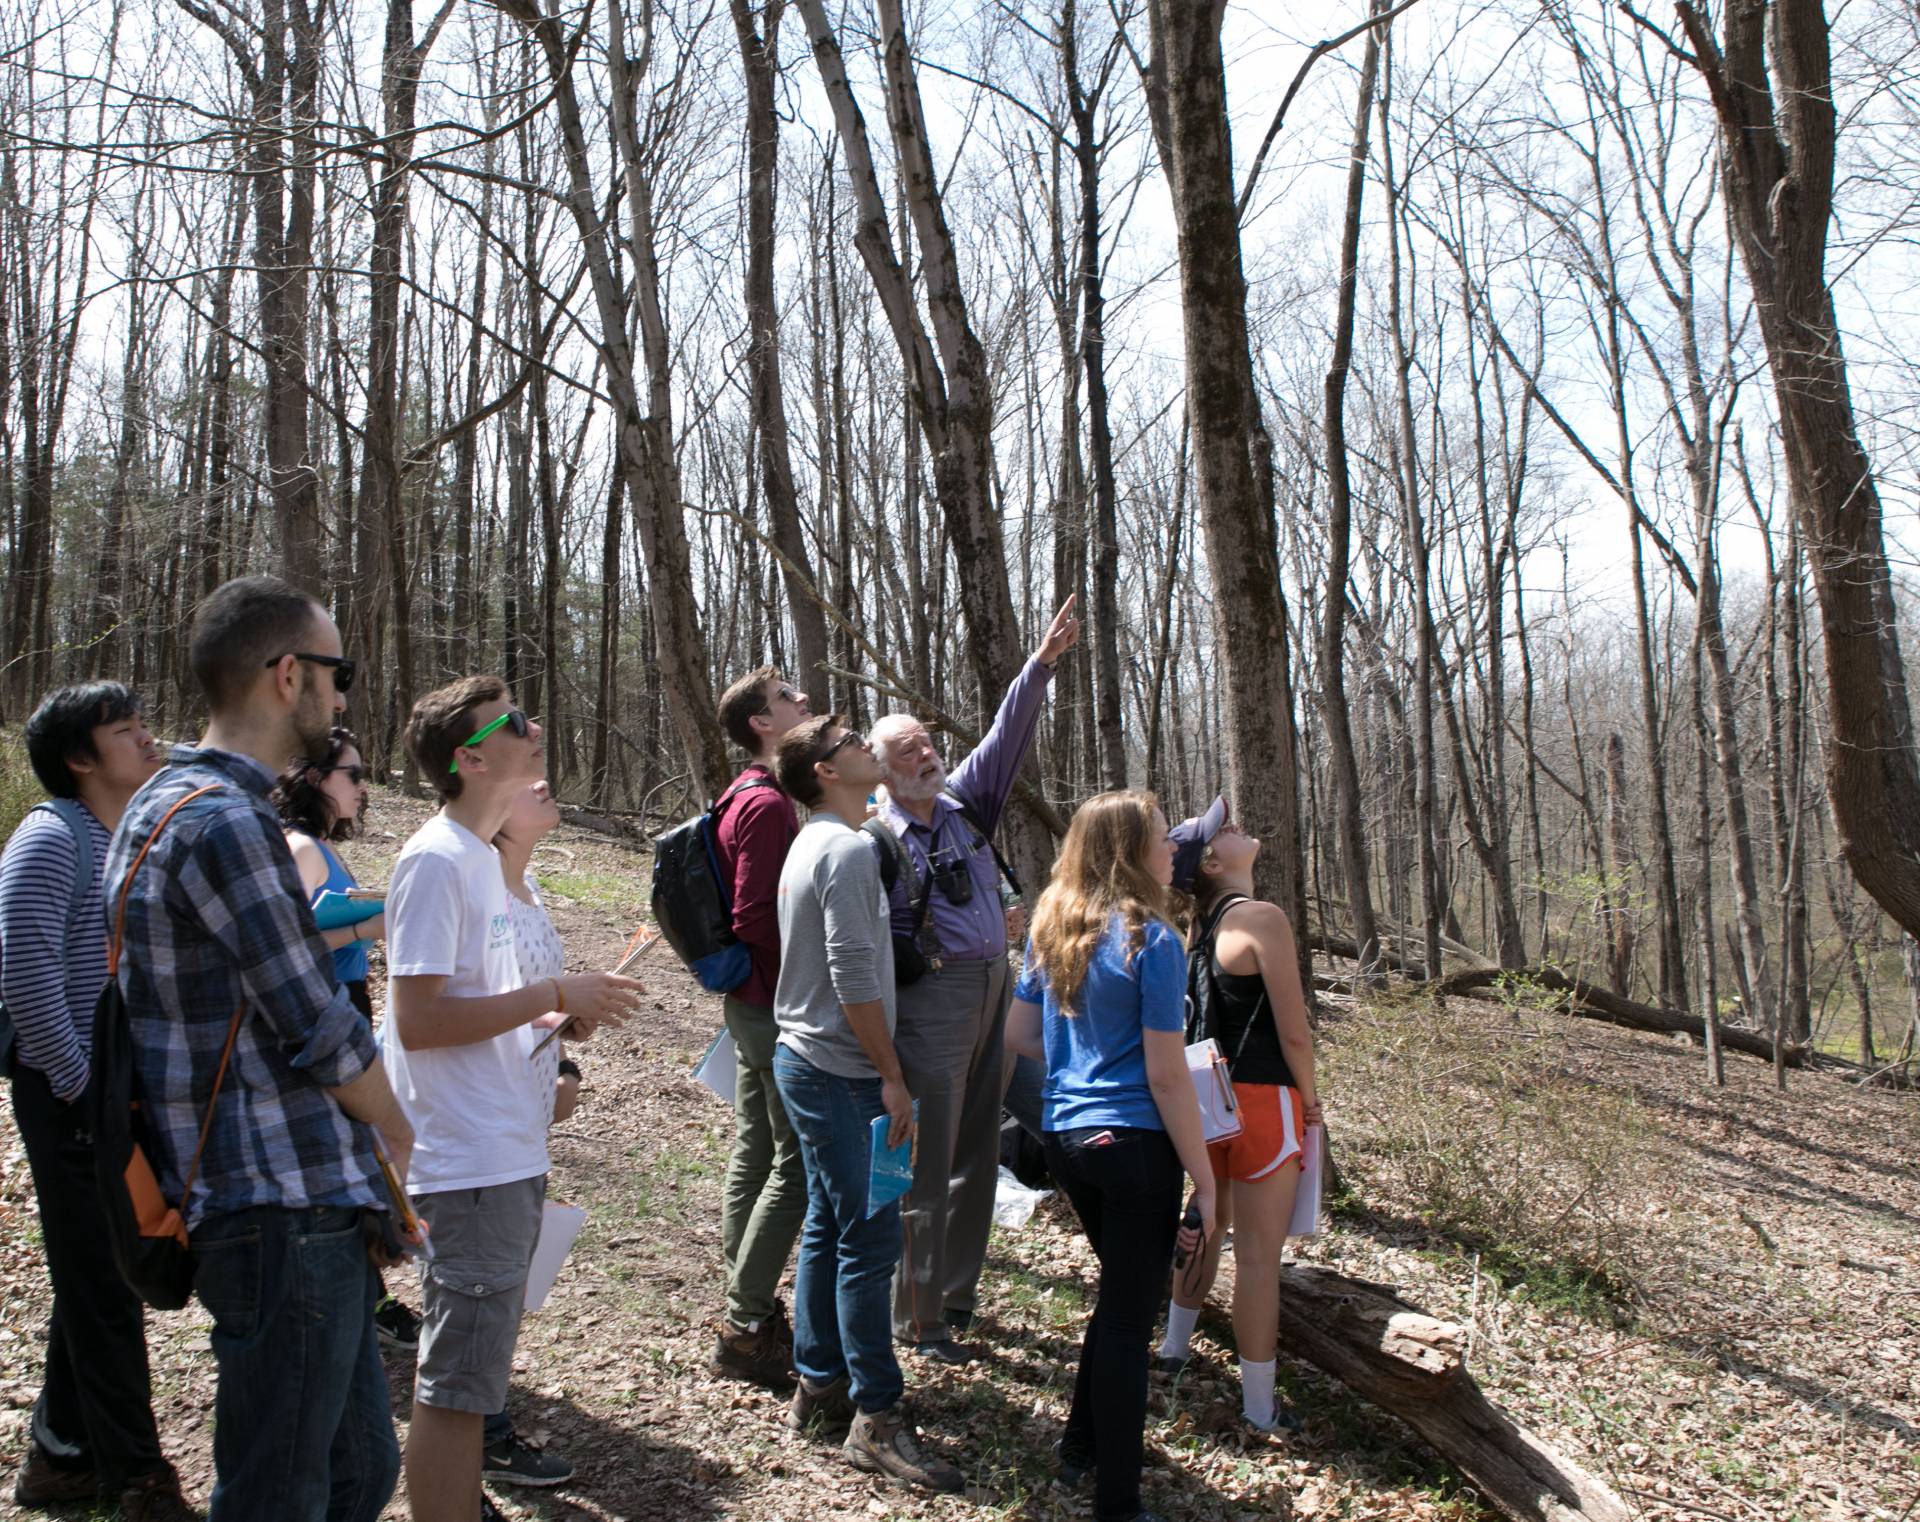 Students in forest looking at trees with Professor Horn